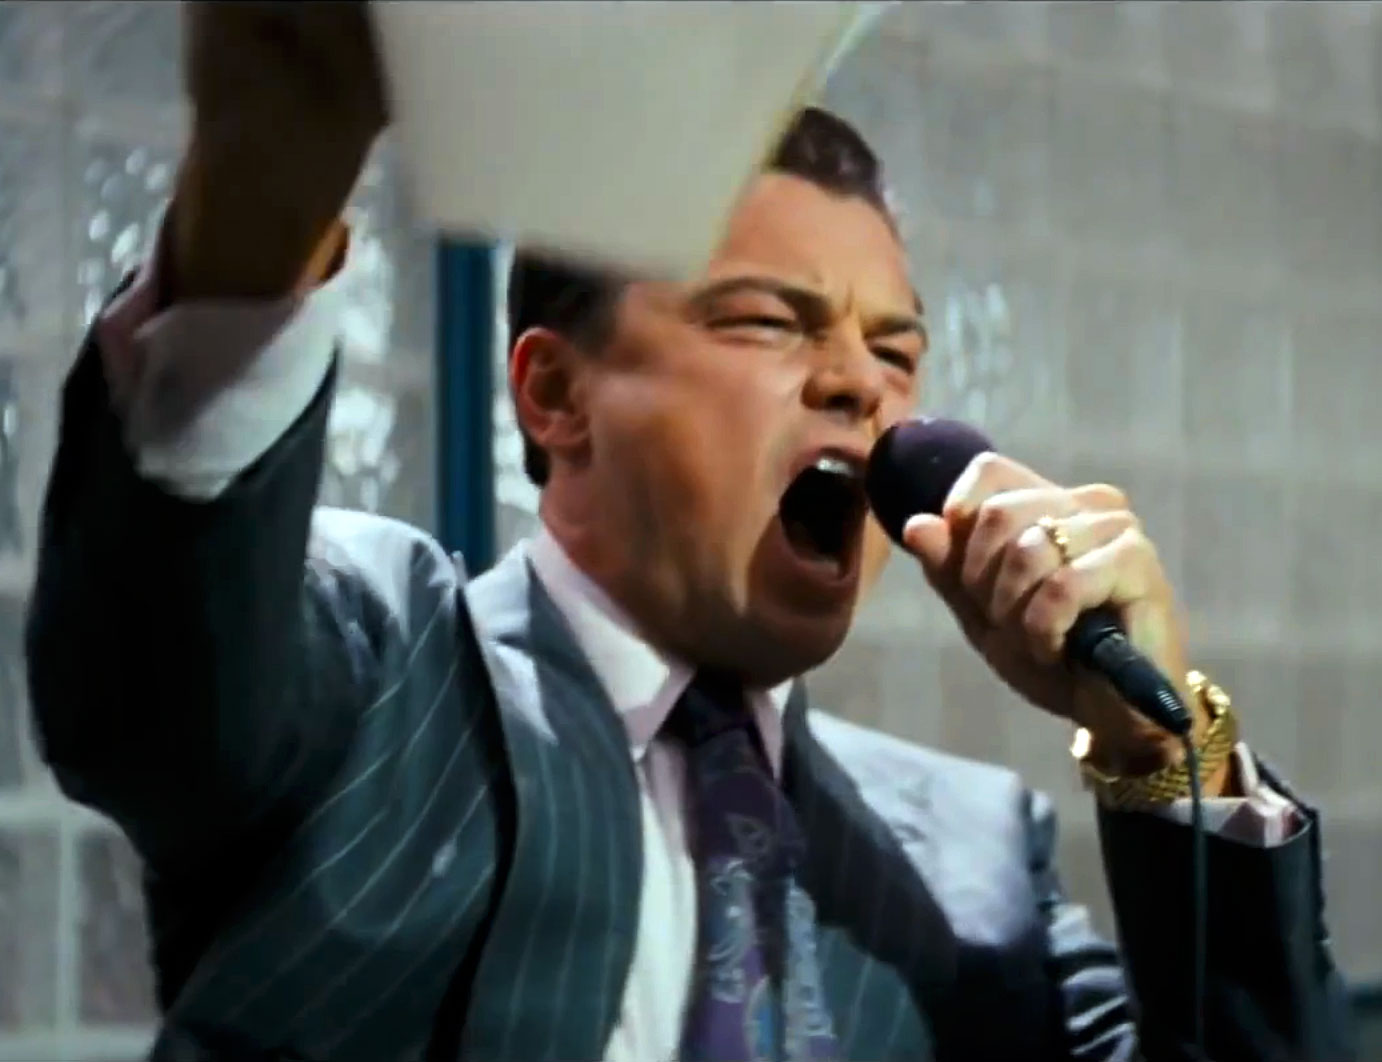 1337x The Wolf of Wall Street Watch HD Full Movie Online Free Danny